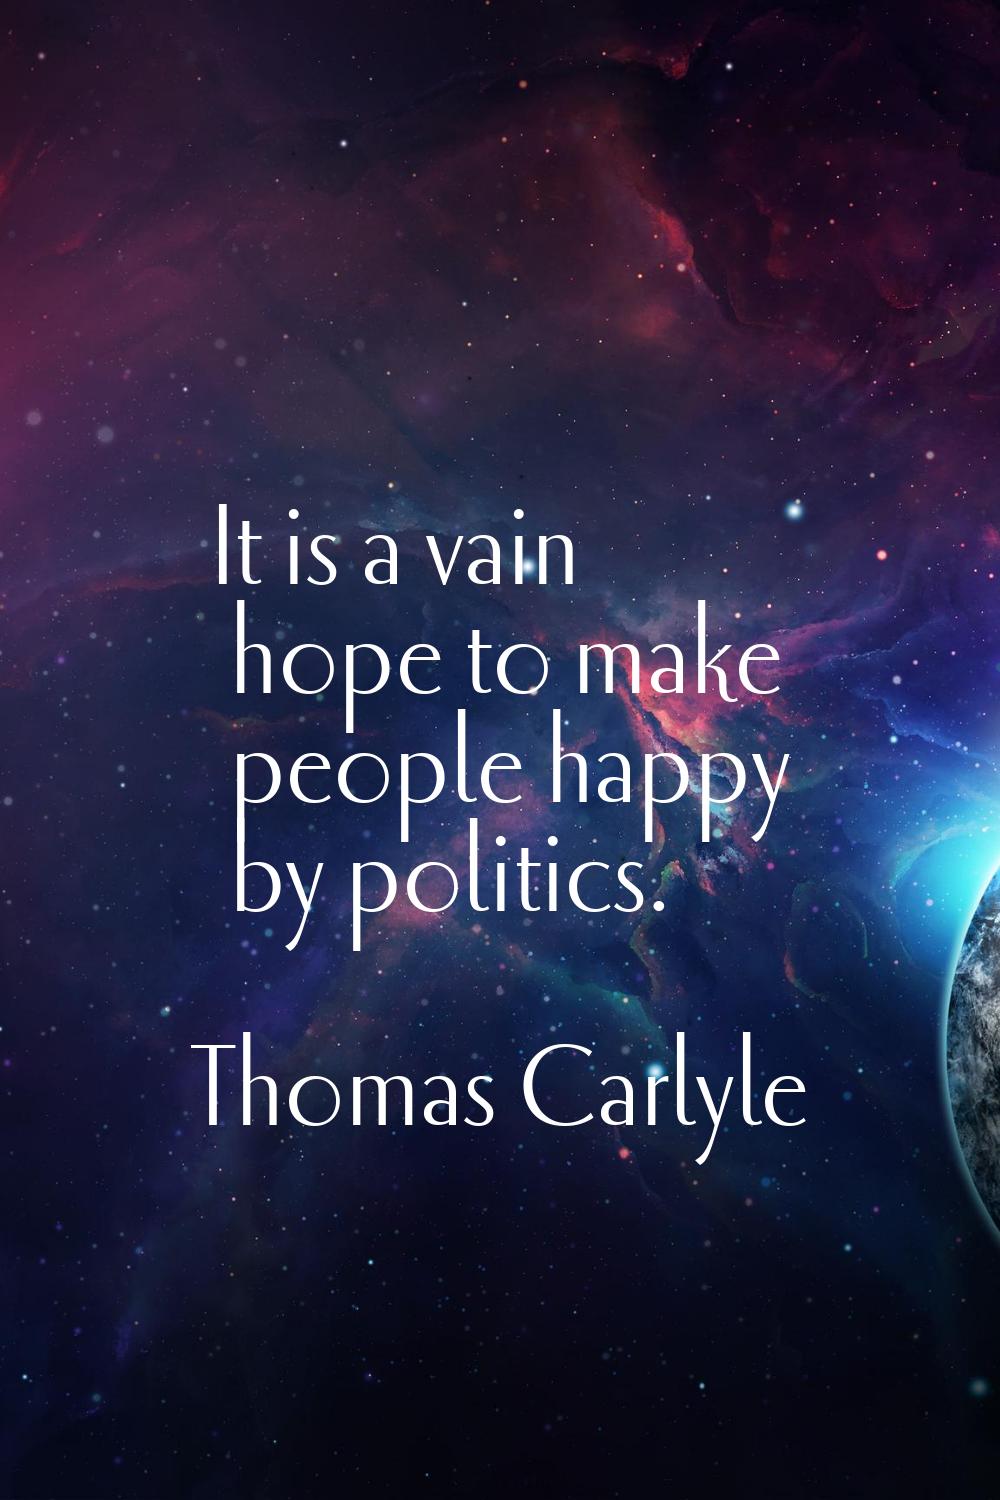 It is a vain hope to make people happy by politics.